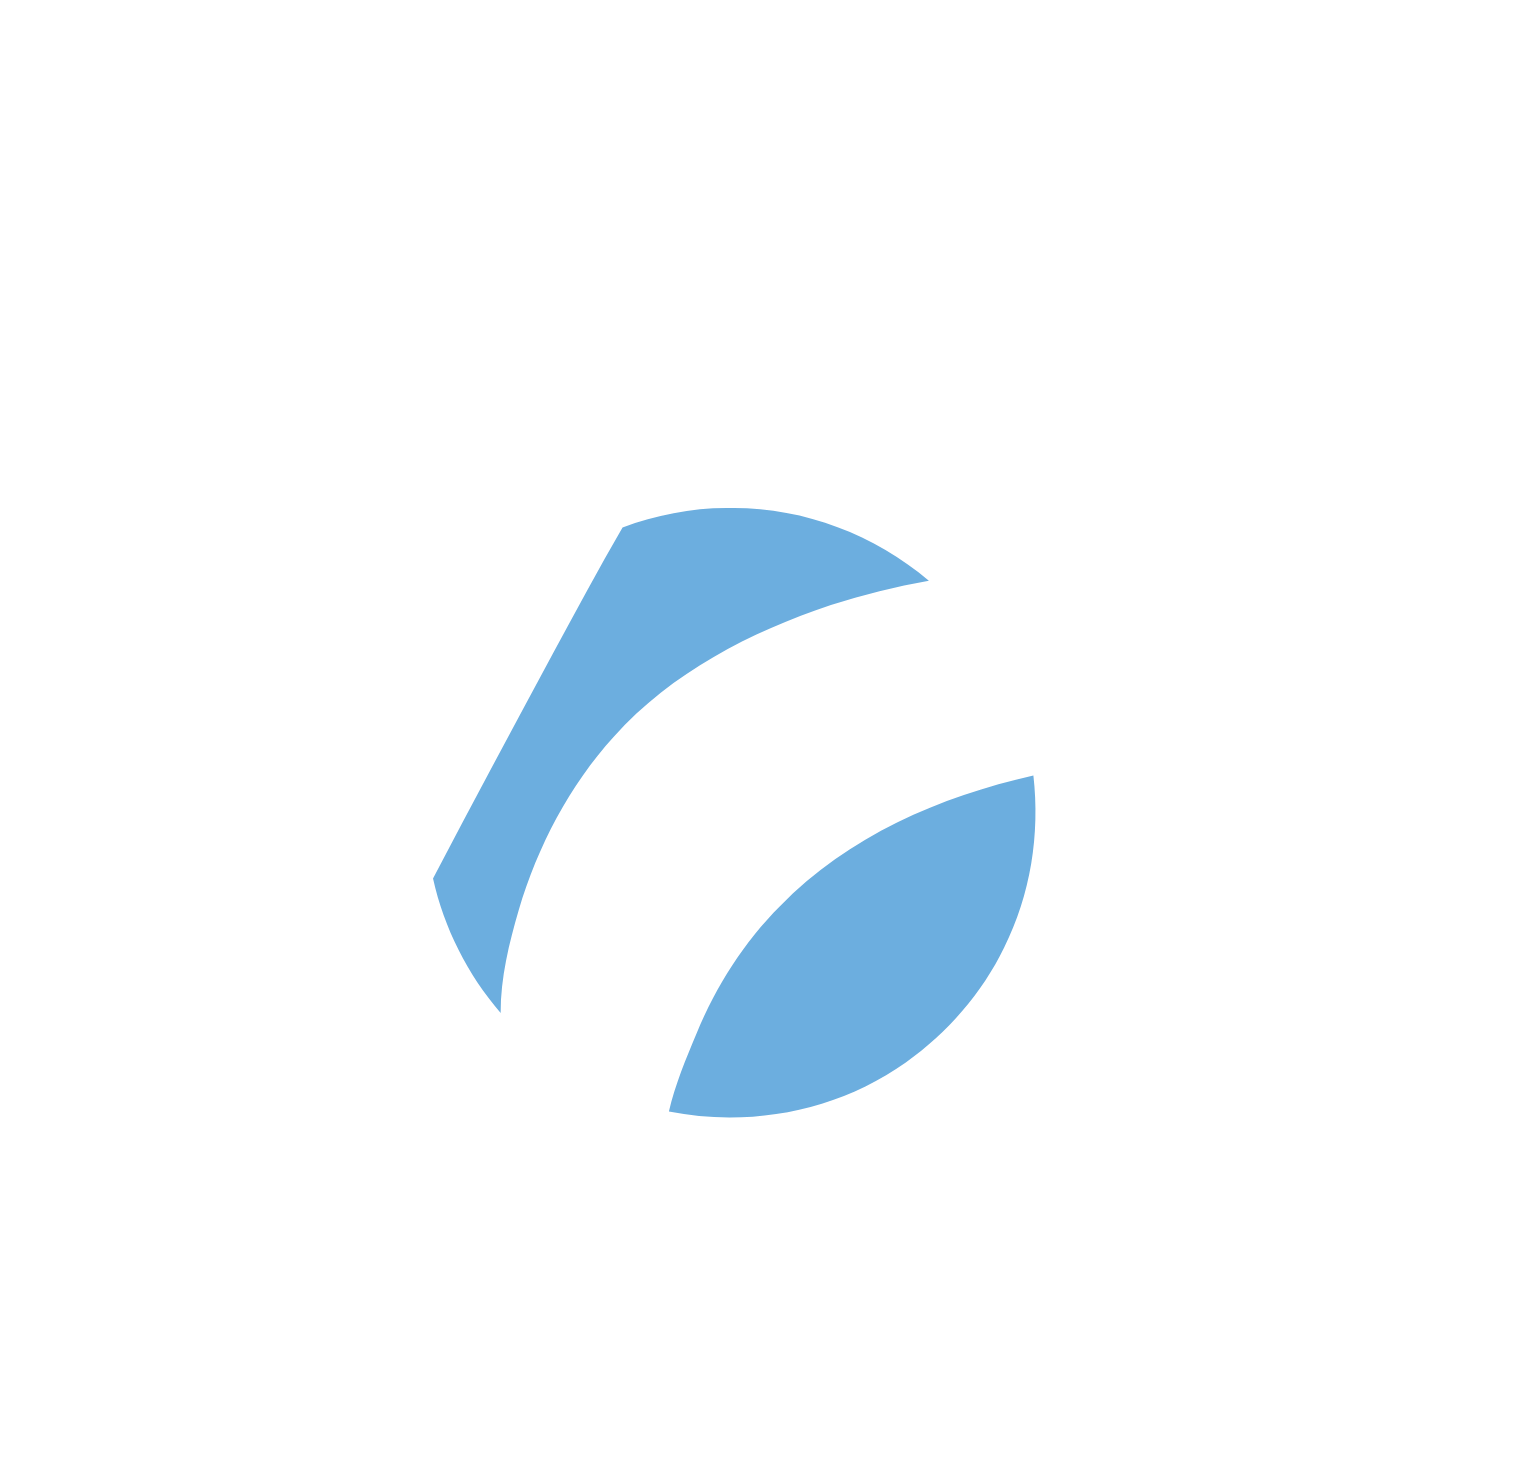 Amicus Therapeutics logo in transparent PNG and vectorized SVG formats